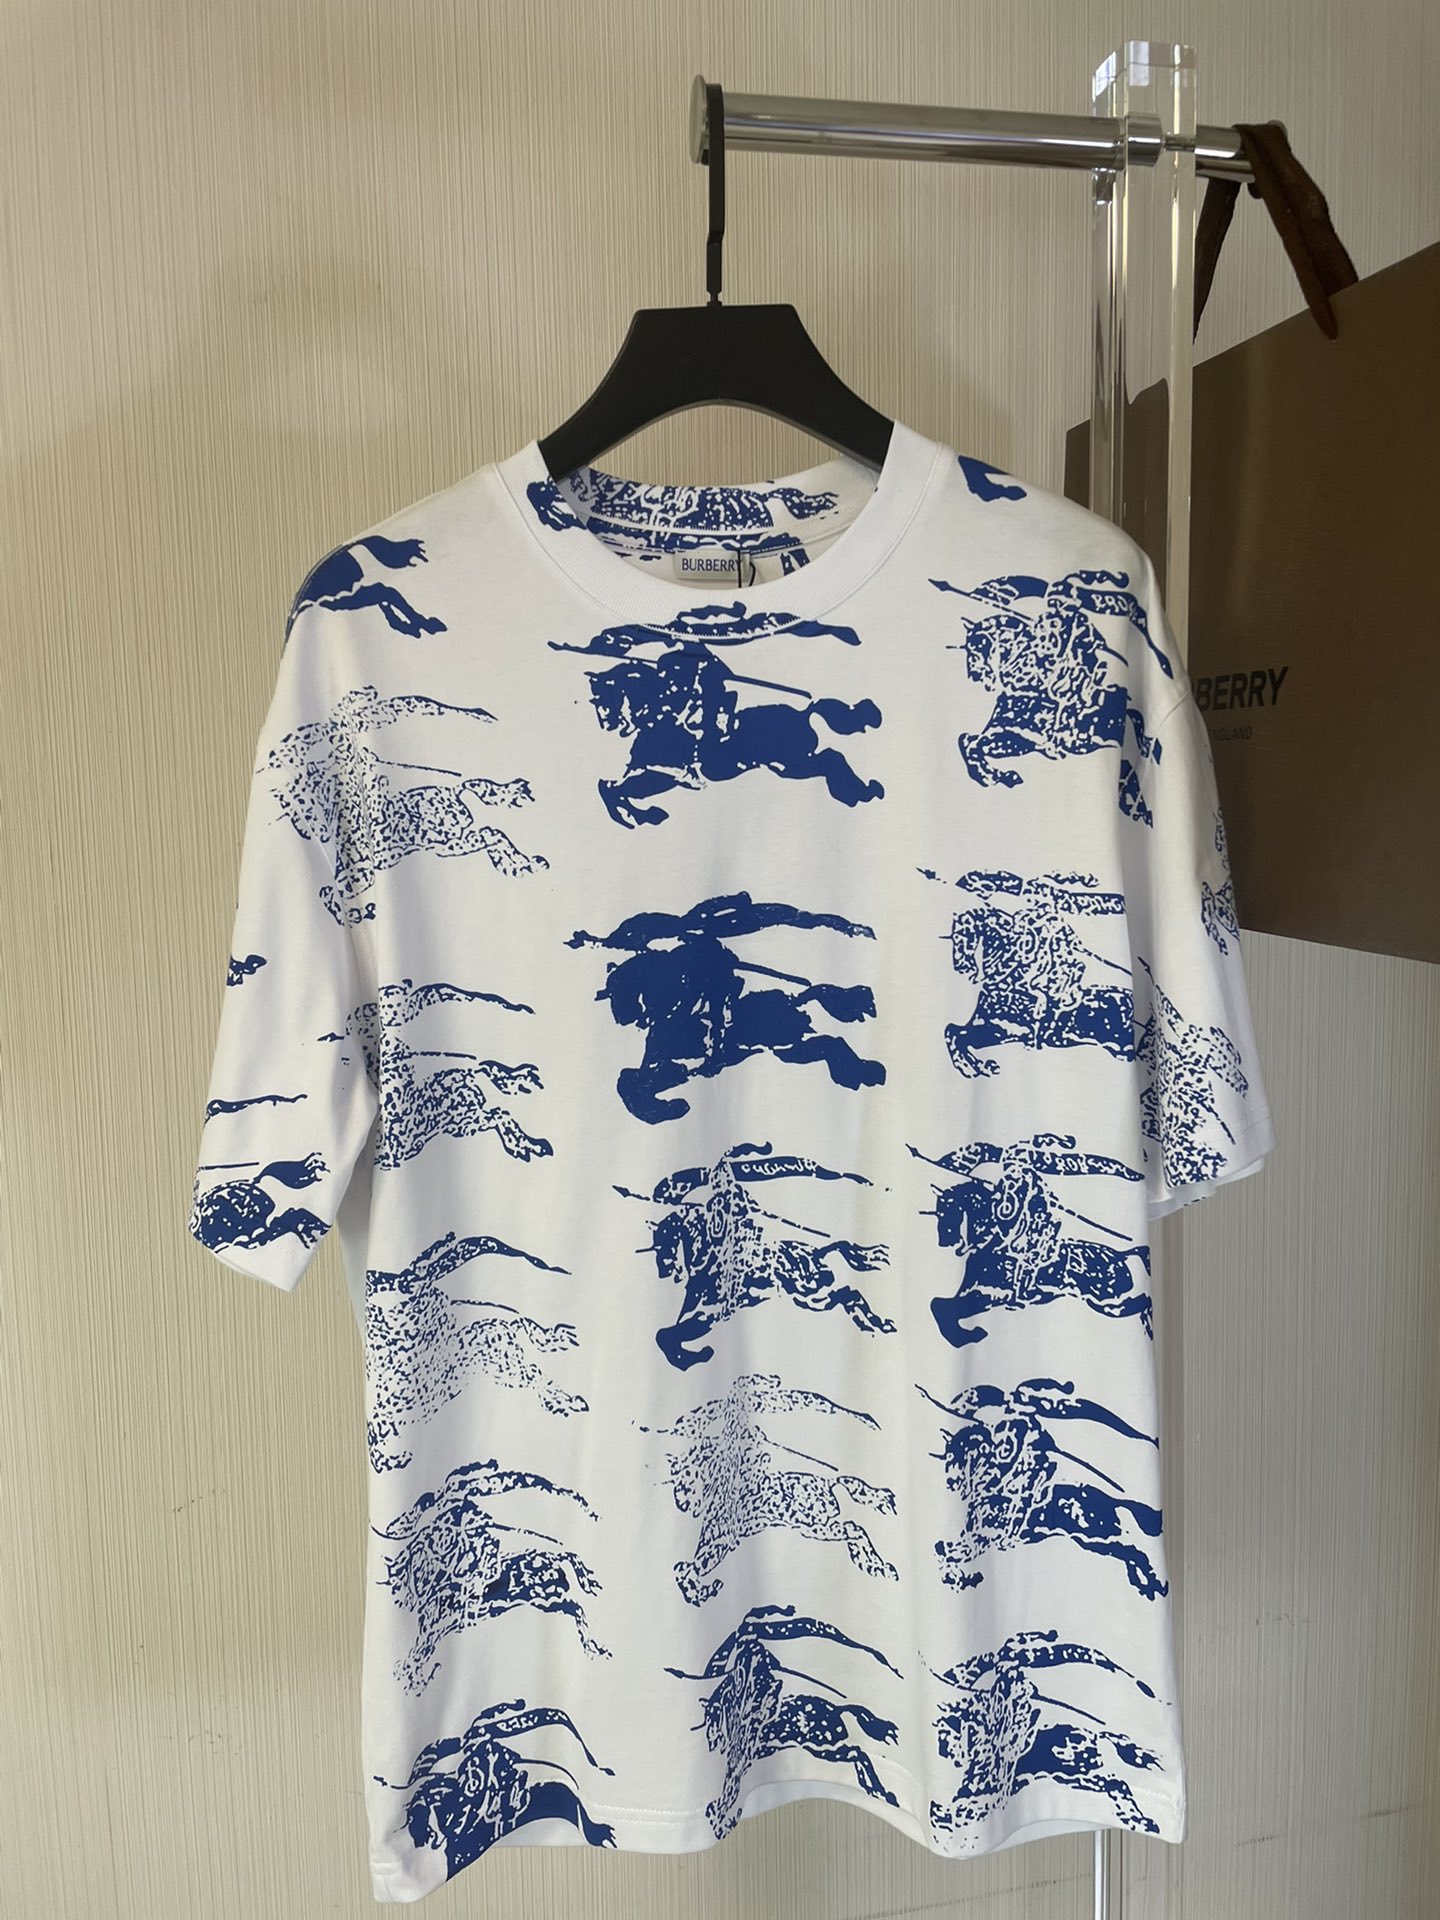 Burberry Clothing T-Shirt Blue Printing Combed Cotton